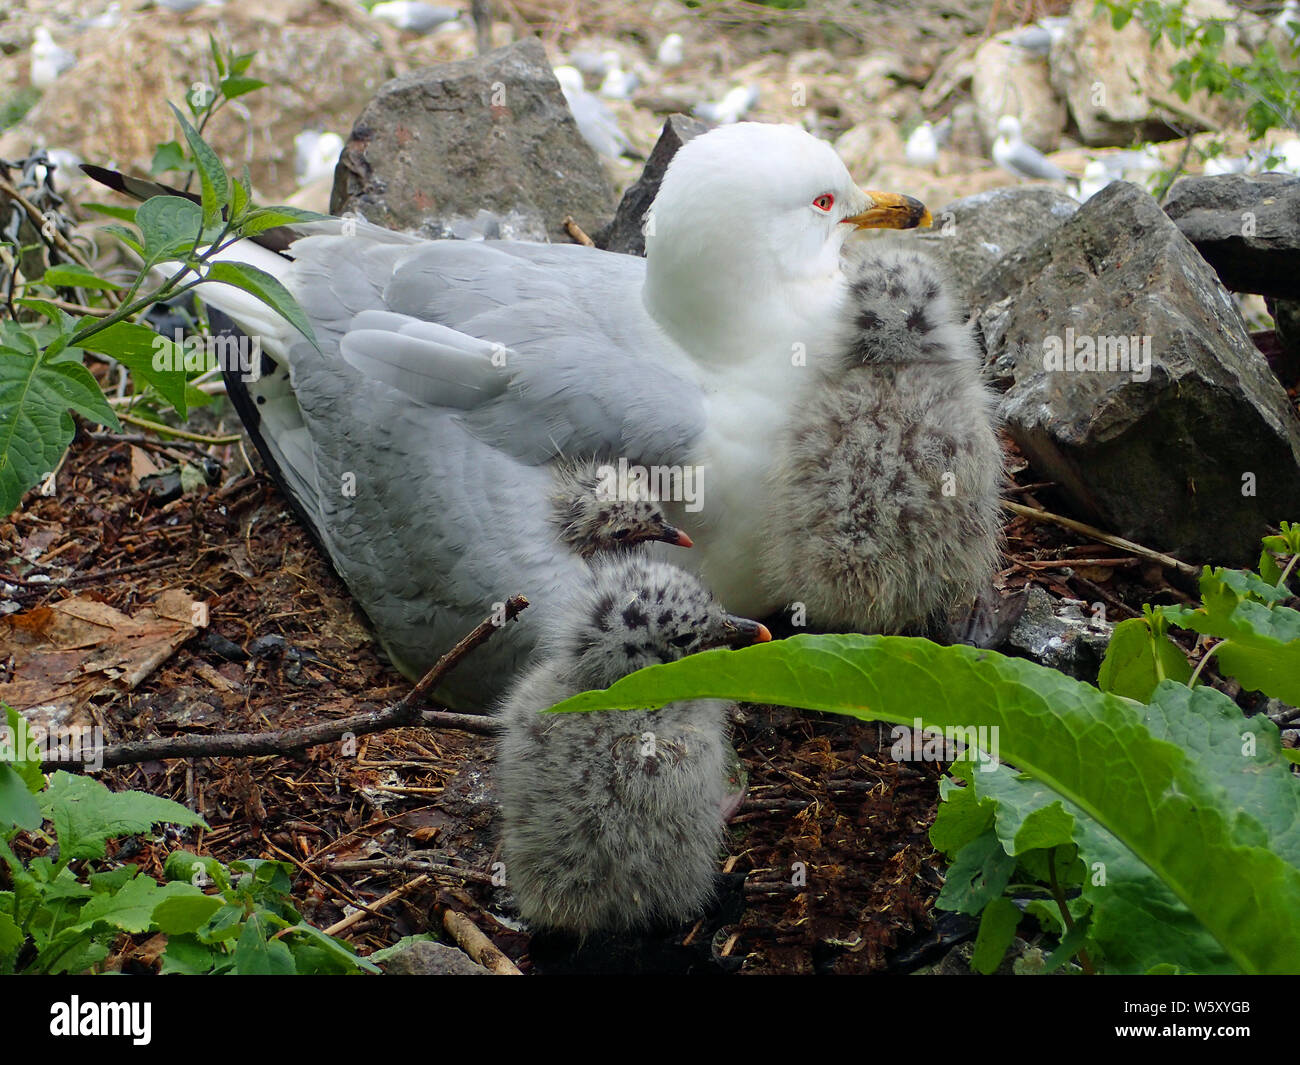 Grey and white ring-billed seagull (Larus) with bright red eye and yellow beak, nesting 3 fluffy black spotted gull chicks, one under wing. Stock Photo